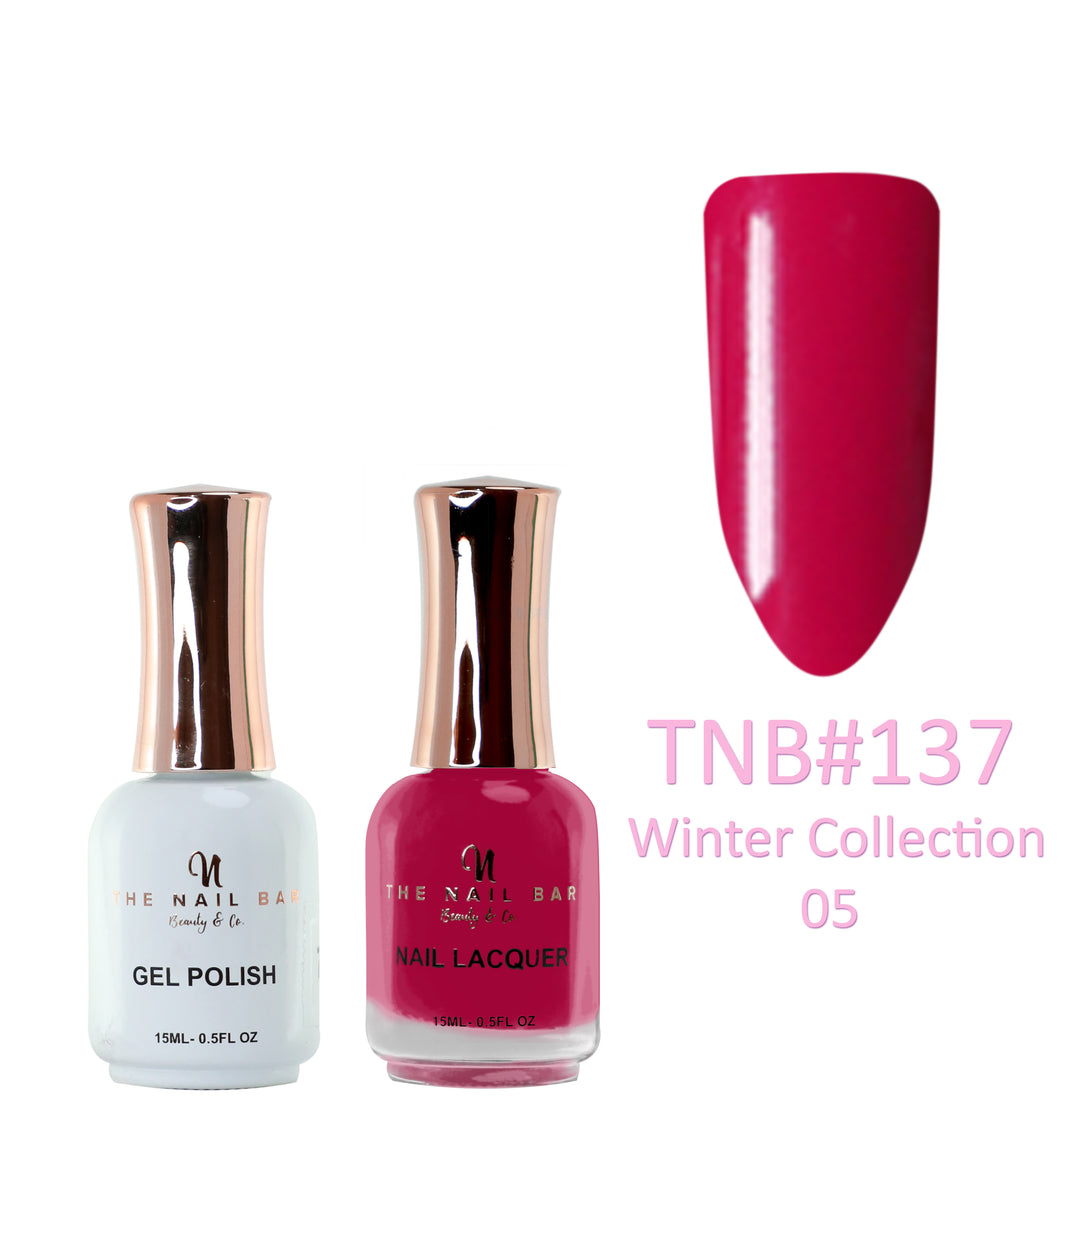 Dual Polish/Gel colour matching (15ml) - Winter collection 05